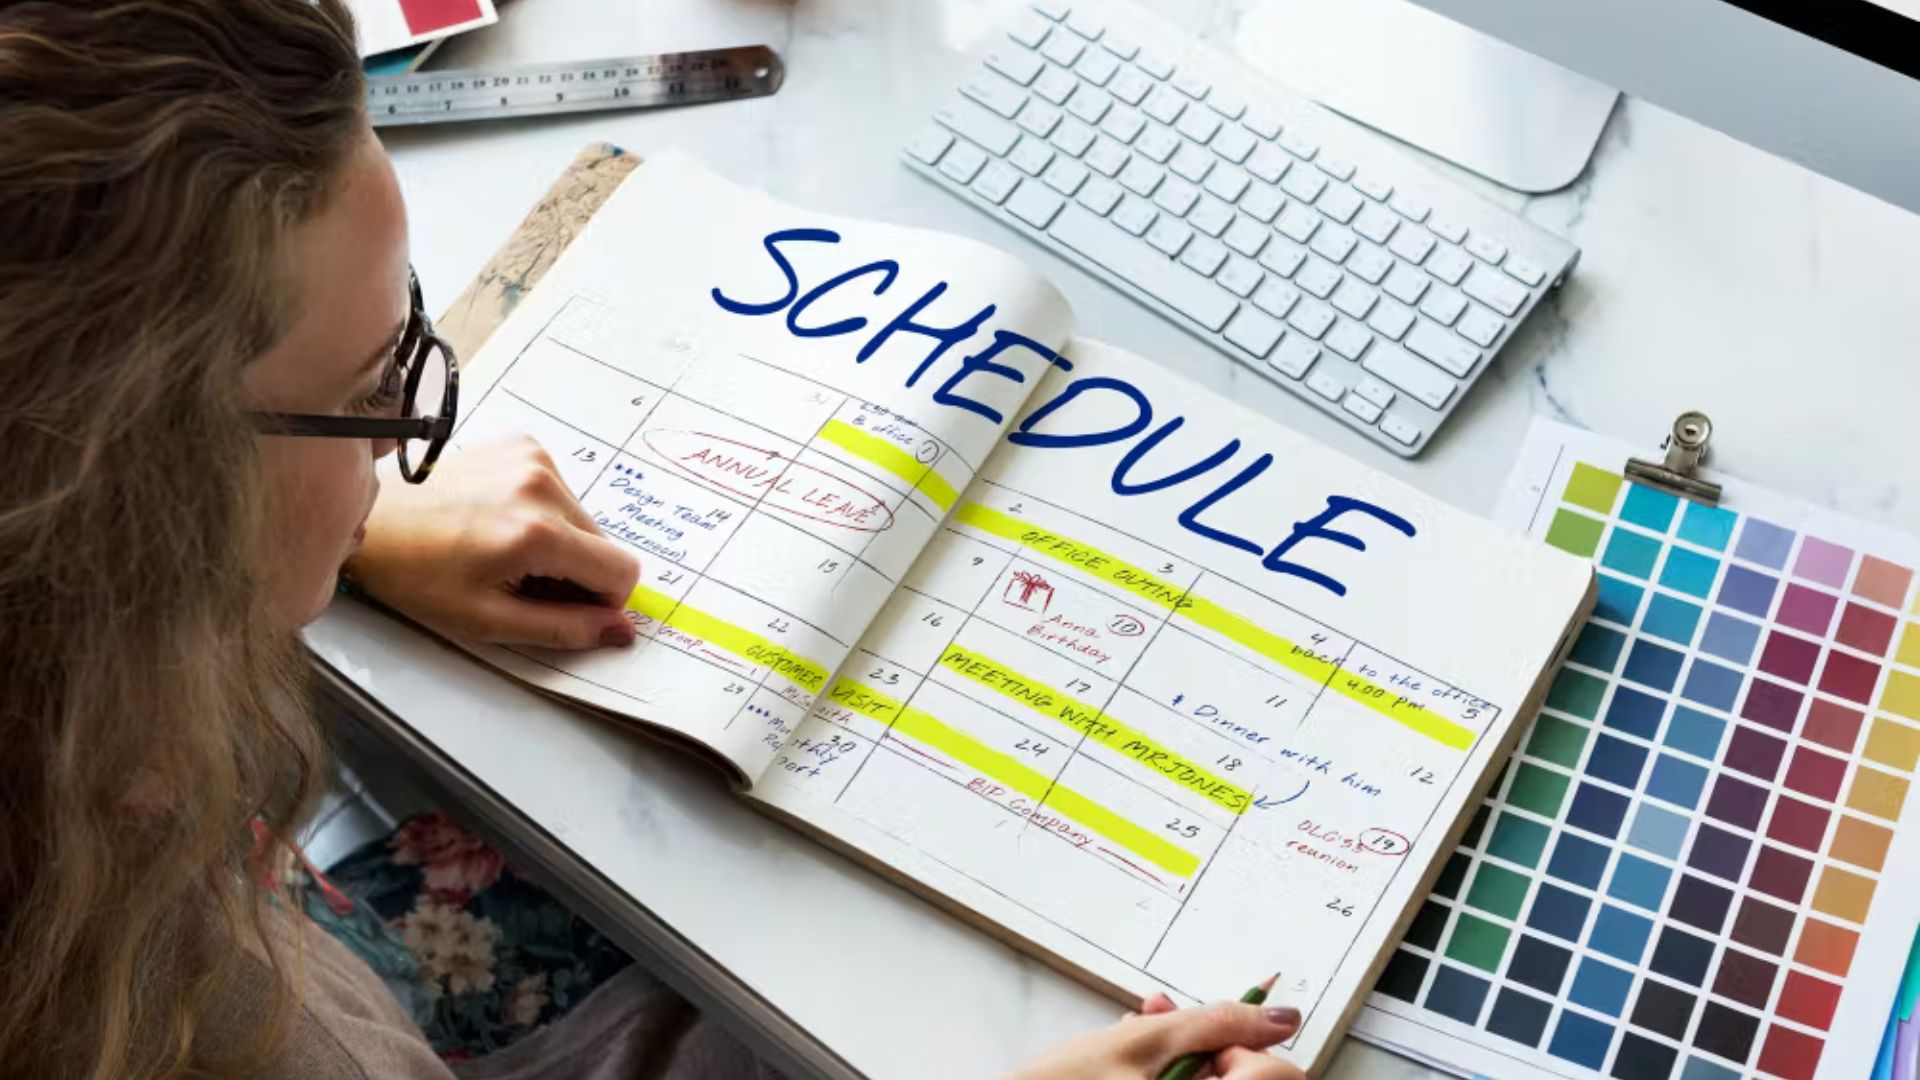 this image shows how to create a Study Schedule